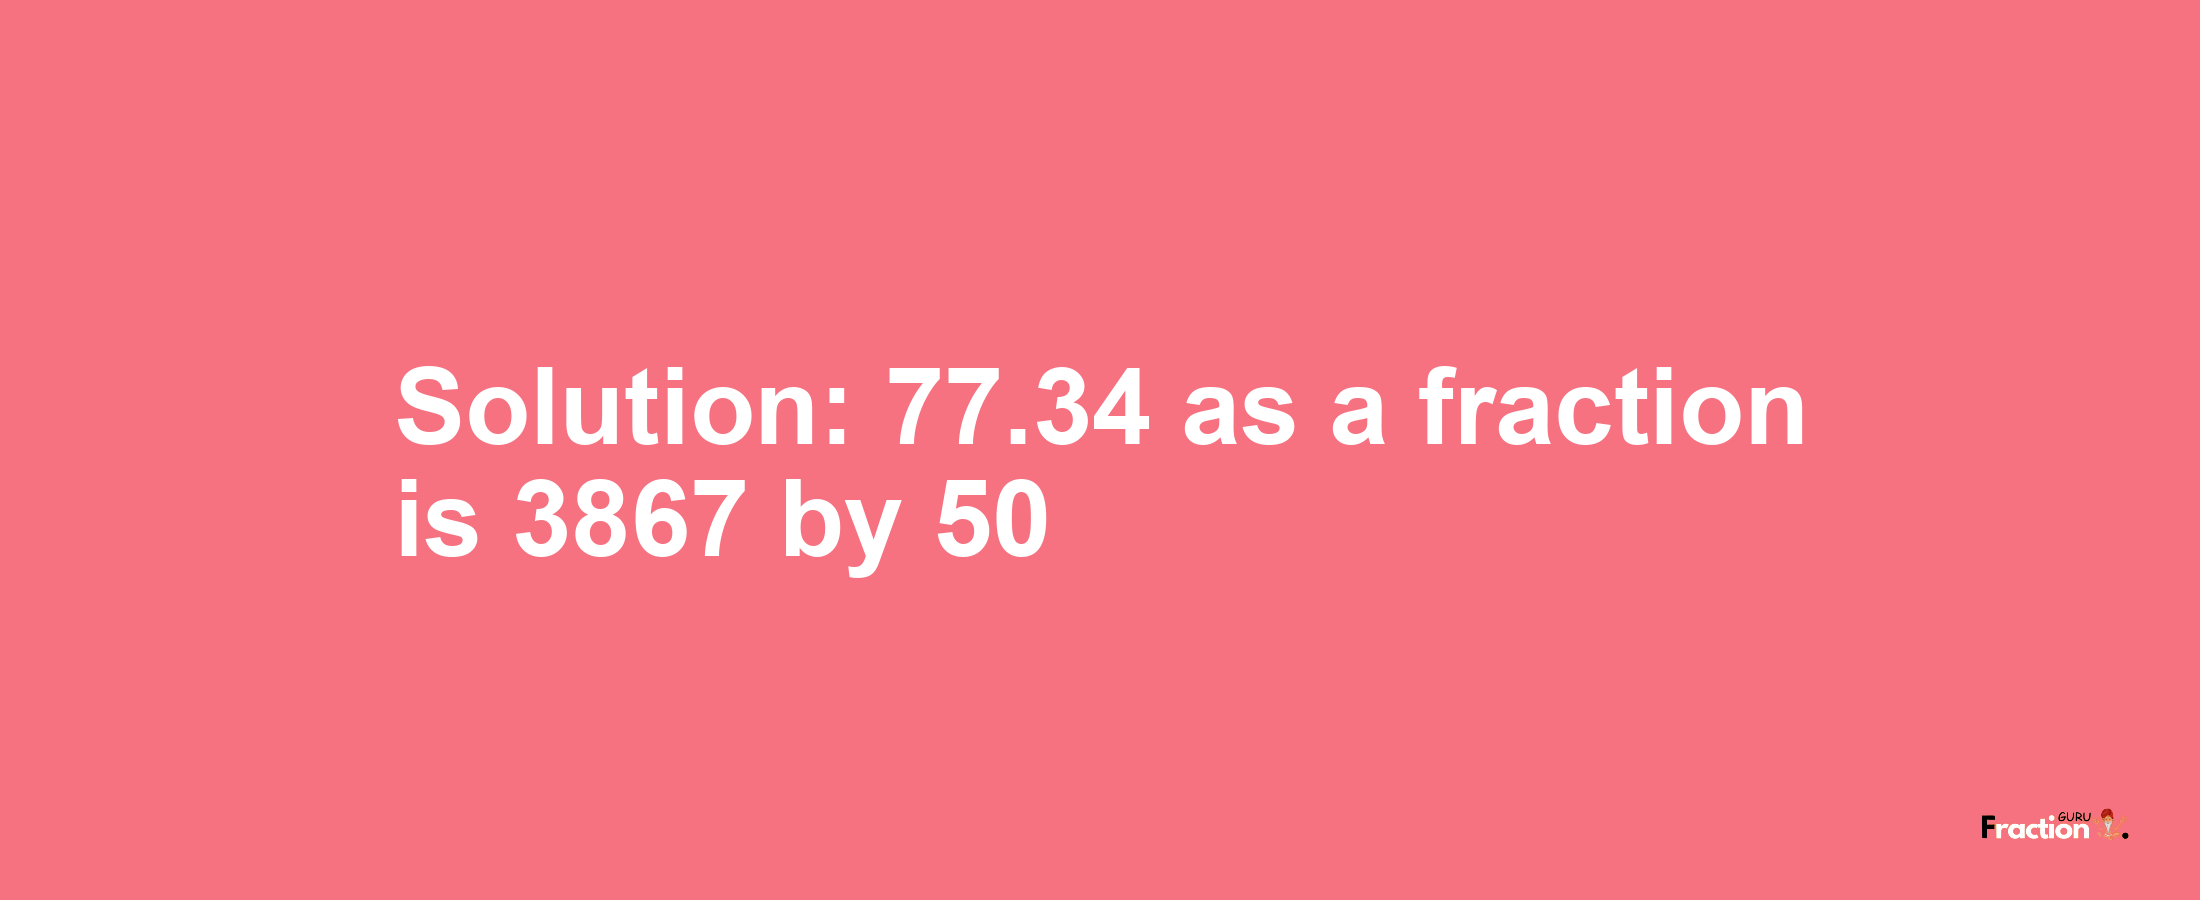 Solution:77.34 as a fraction is 3867/50